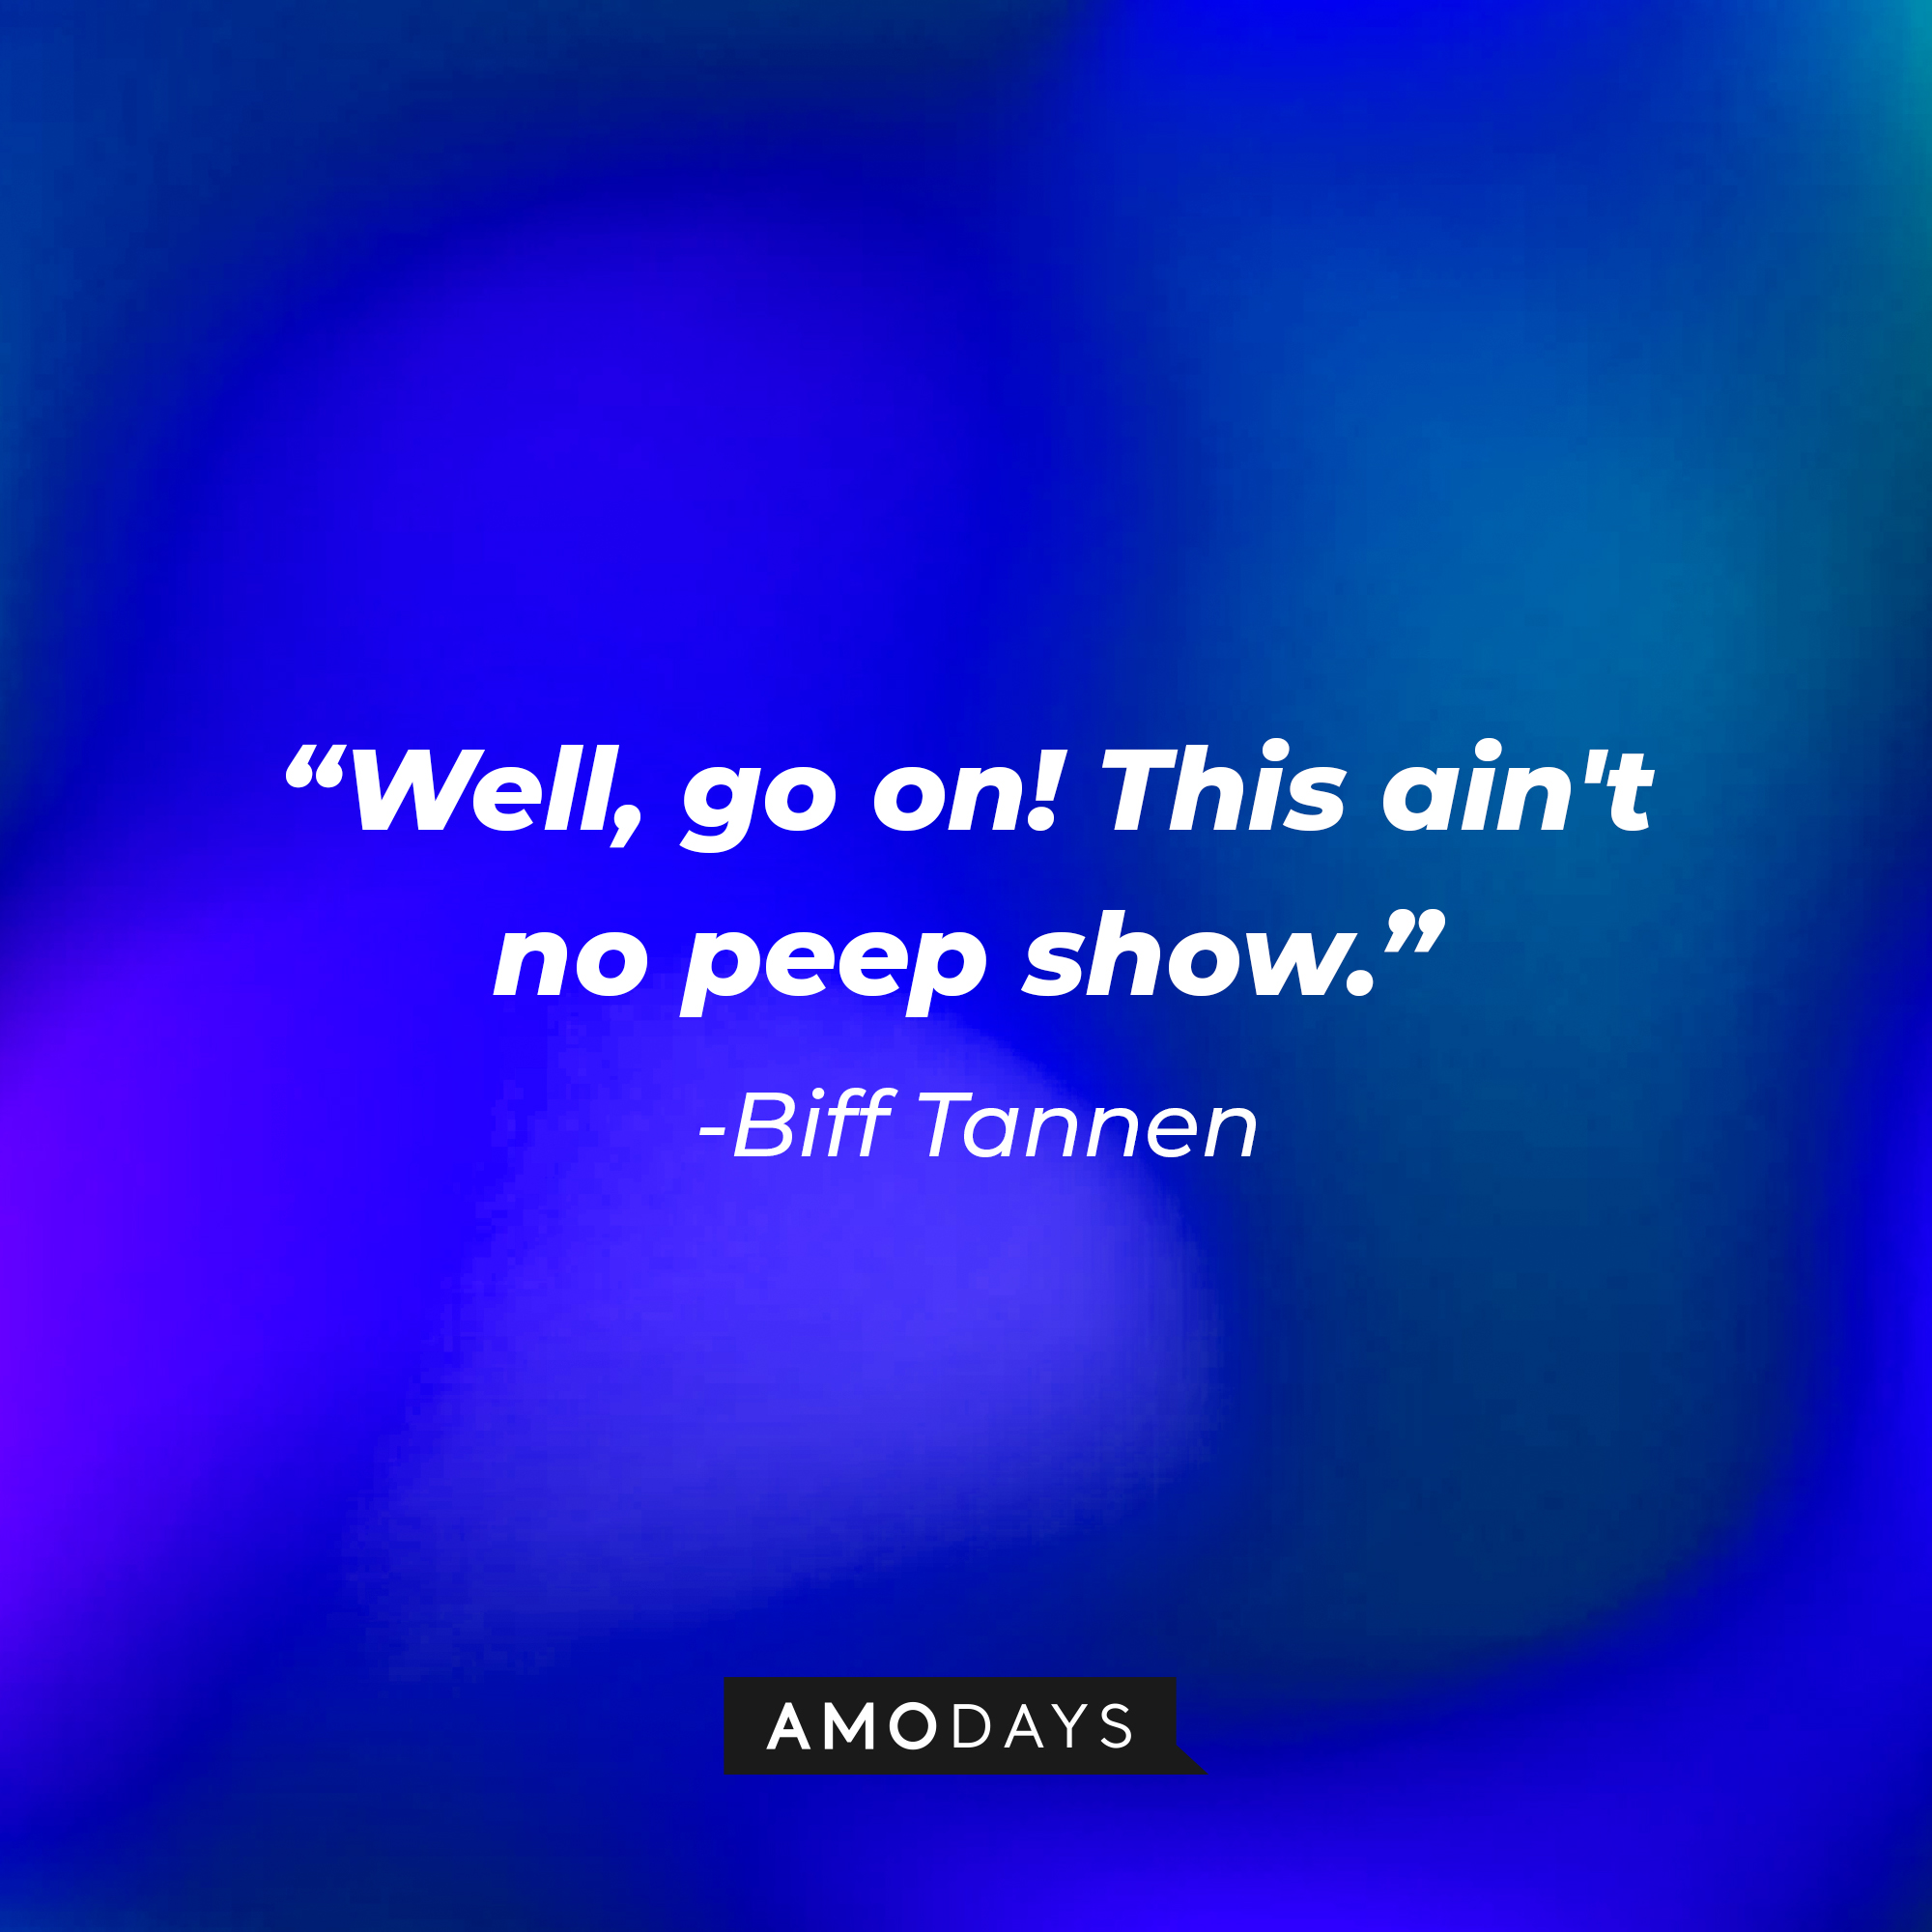 Biff Tannen’s quote: “Well, go on! This ain't no peep show.” | Source: AmoDays